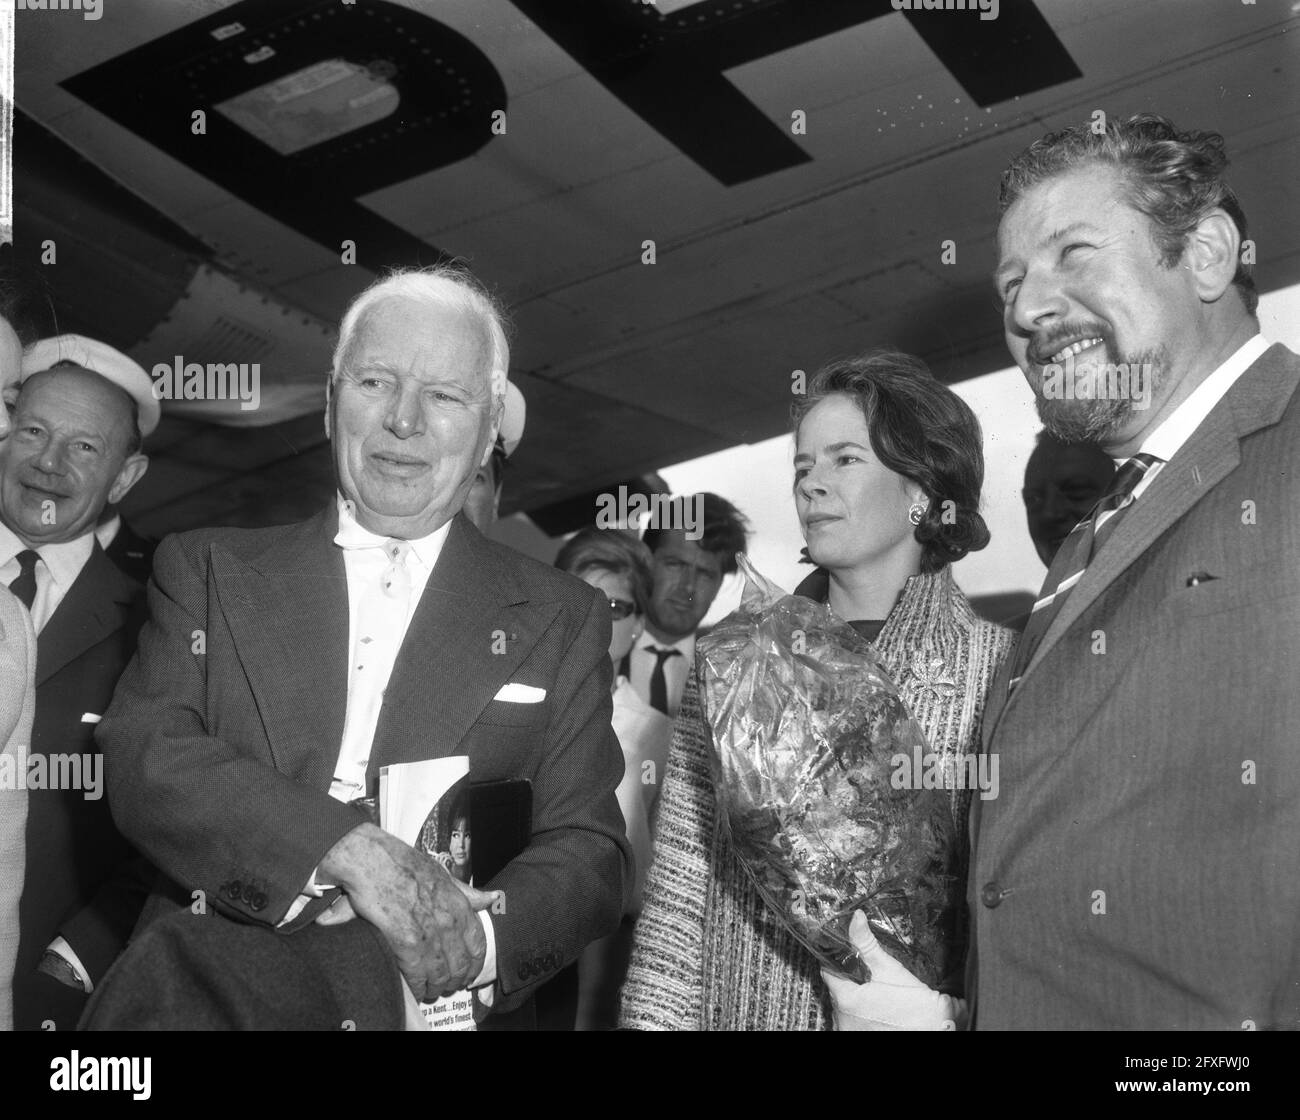 From left to right Chaplin, his wife Oona O'Neill and Peter Ustinov, June 23, 1965, actors, The Netherlands, 20th century press agency photo, news to remember, documentary, historic photography 1945-1990, visual stories, human history of the Twentieth Century, capturing moments in time Stock Photo